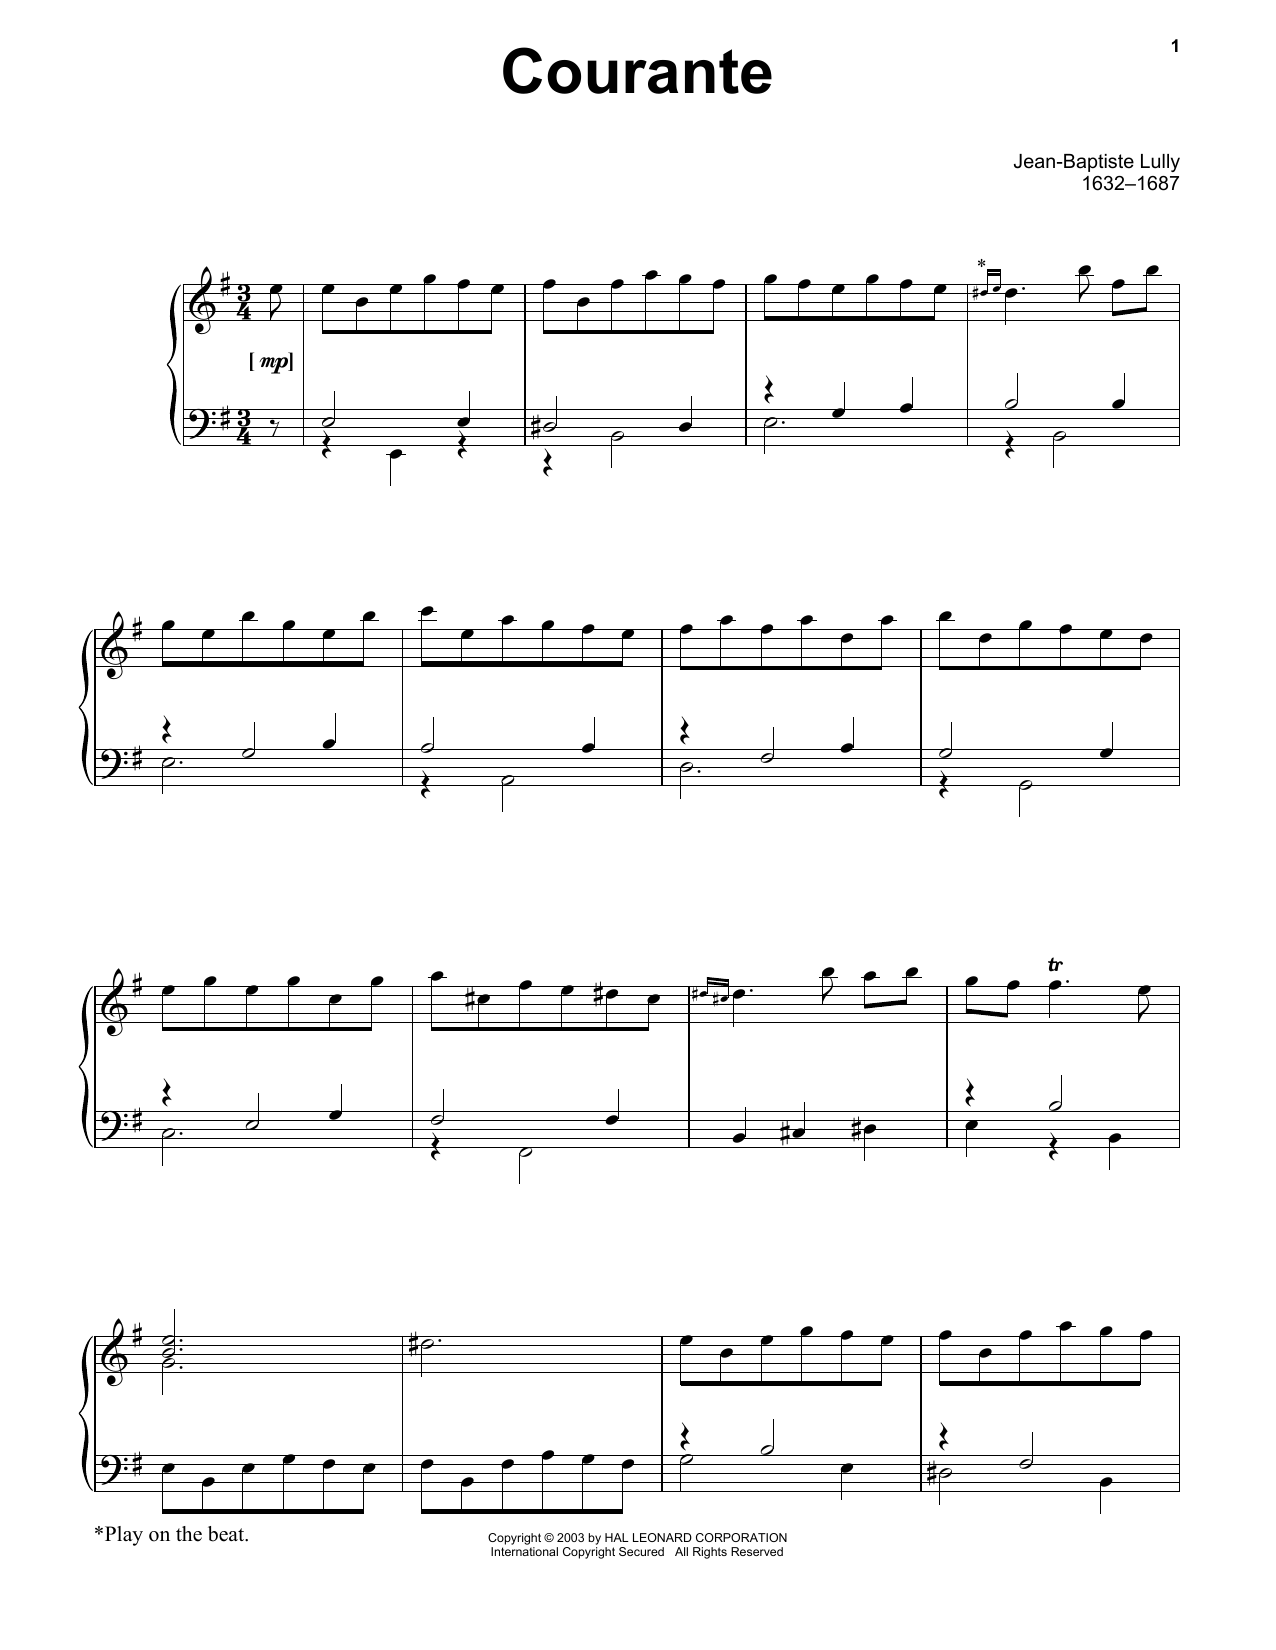 Download Jean-Baptiste Lully Courante Sheet Music